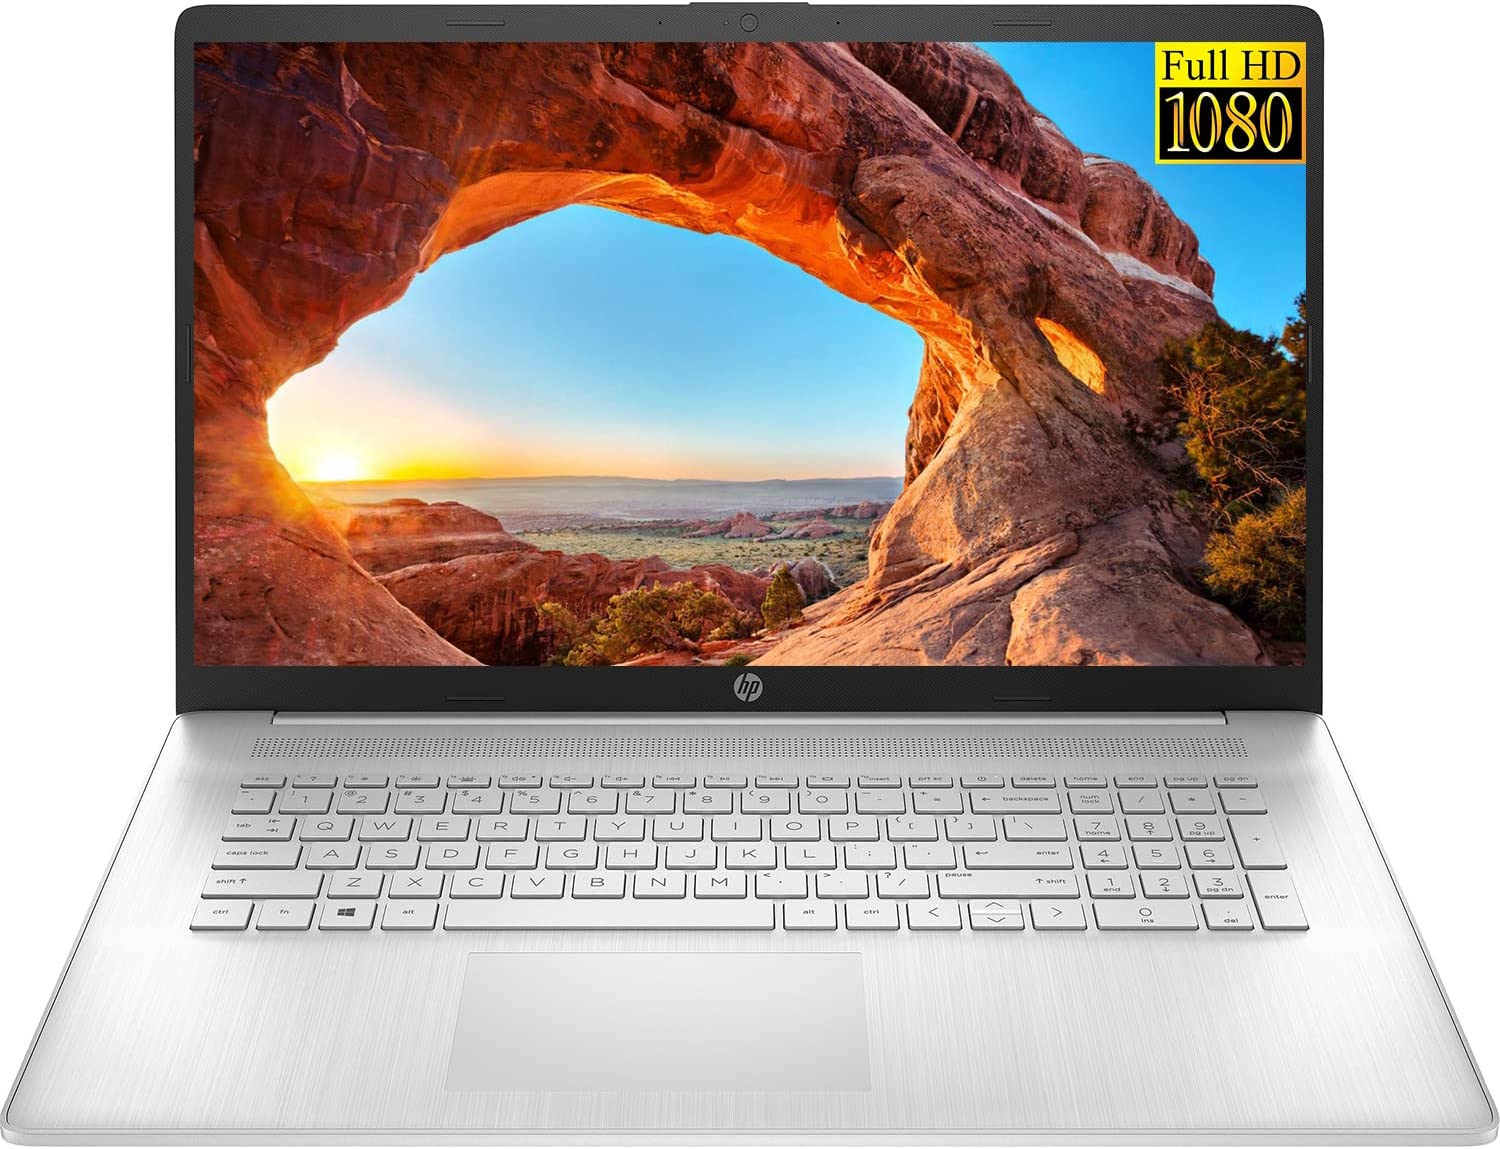  HP 2022 Newest 17 Laptop, 17.3" FHD IPS Display